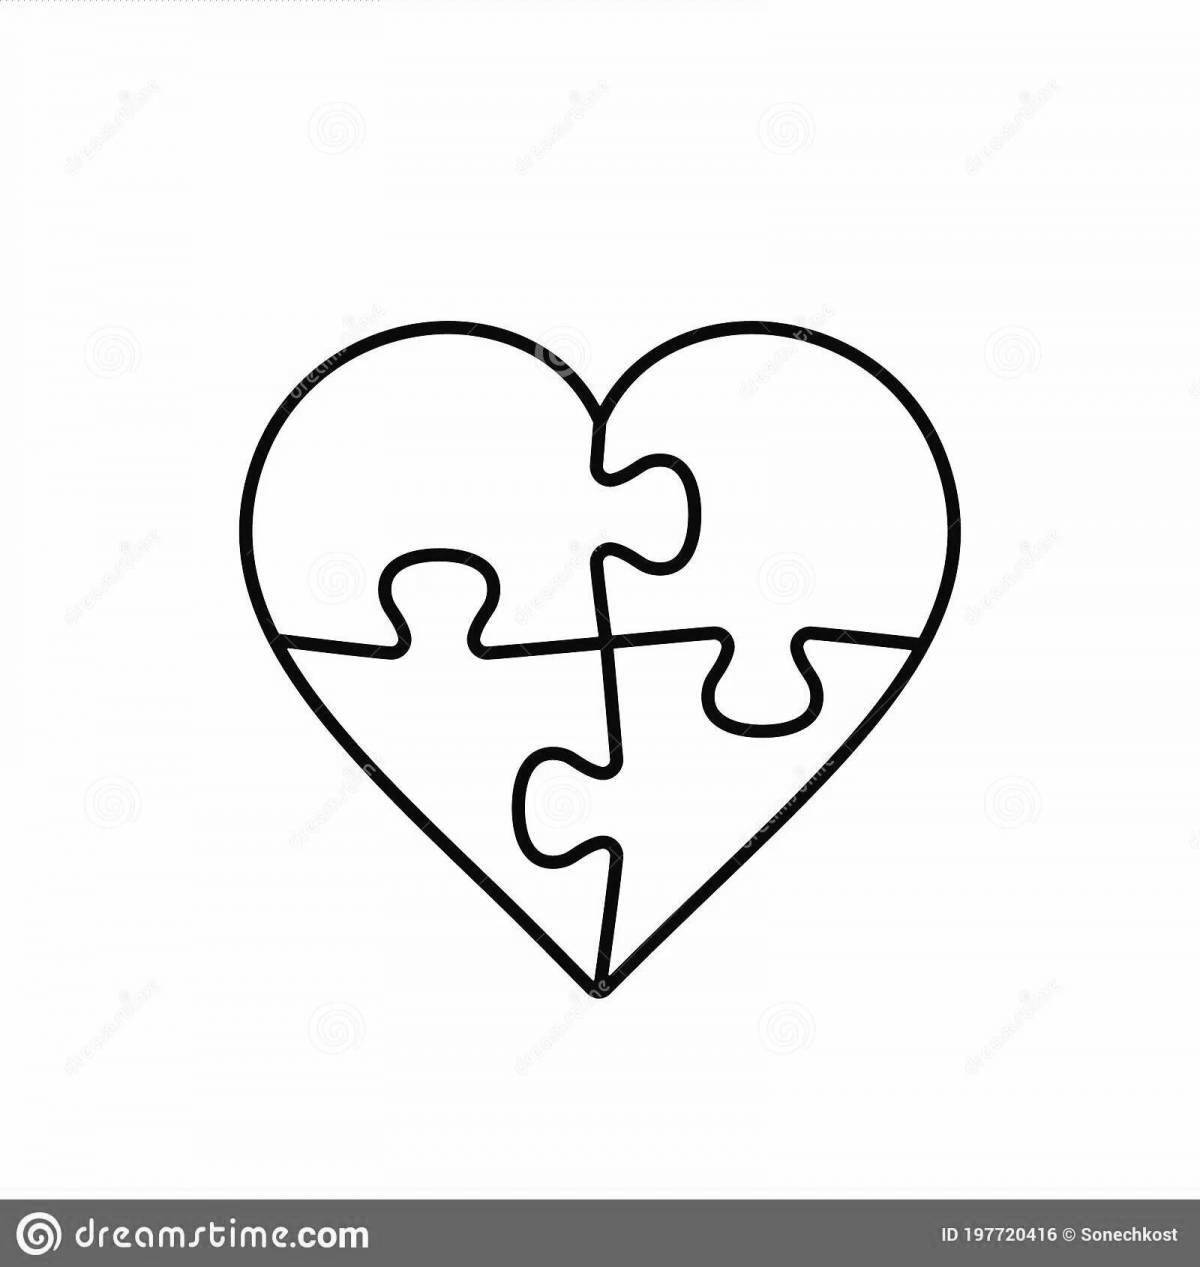 Fun coloring pages with hearts